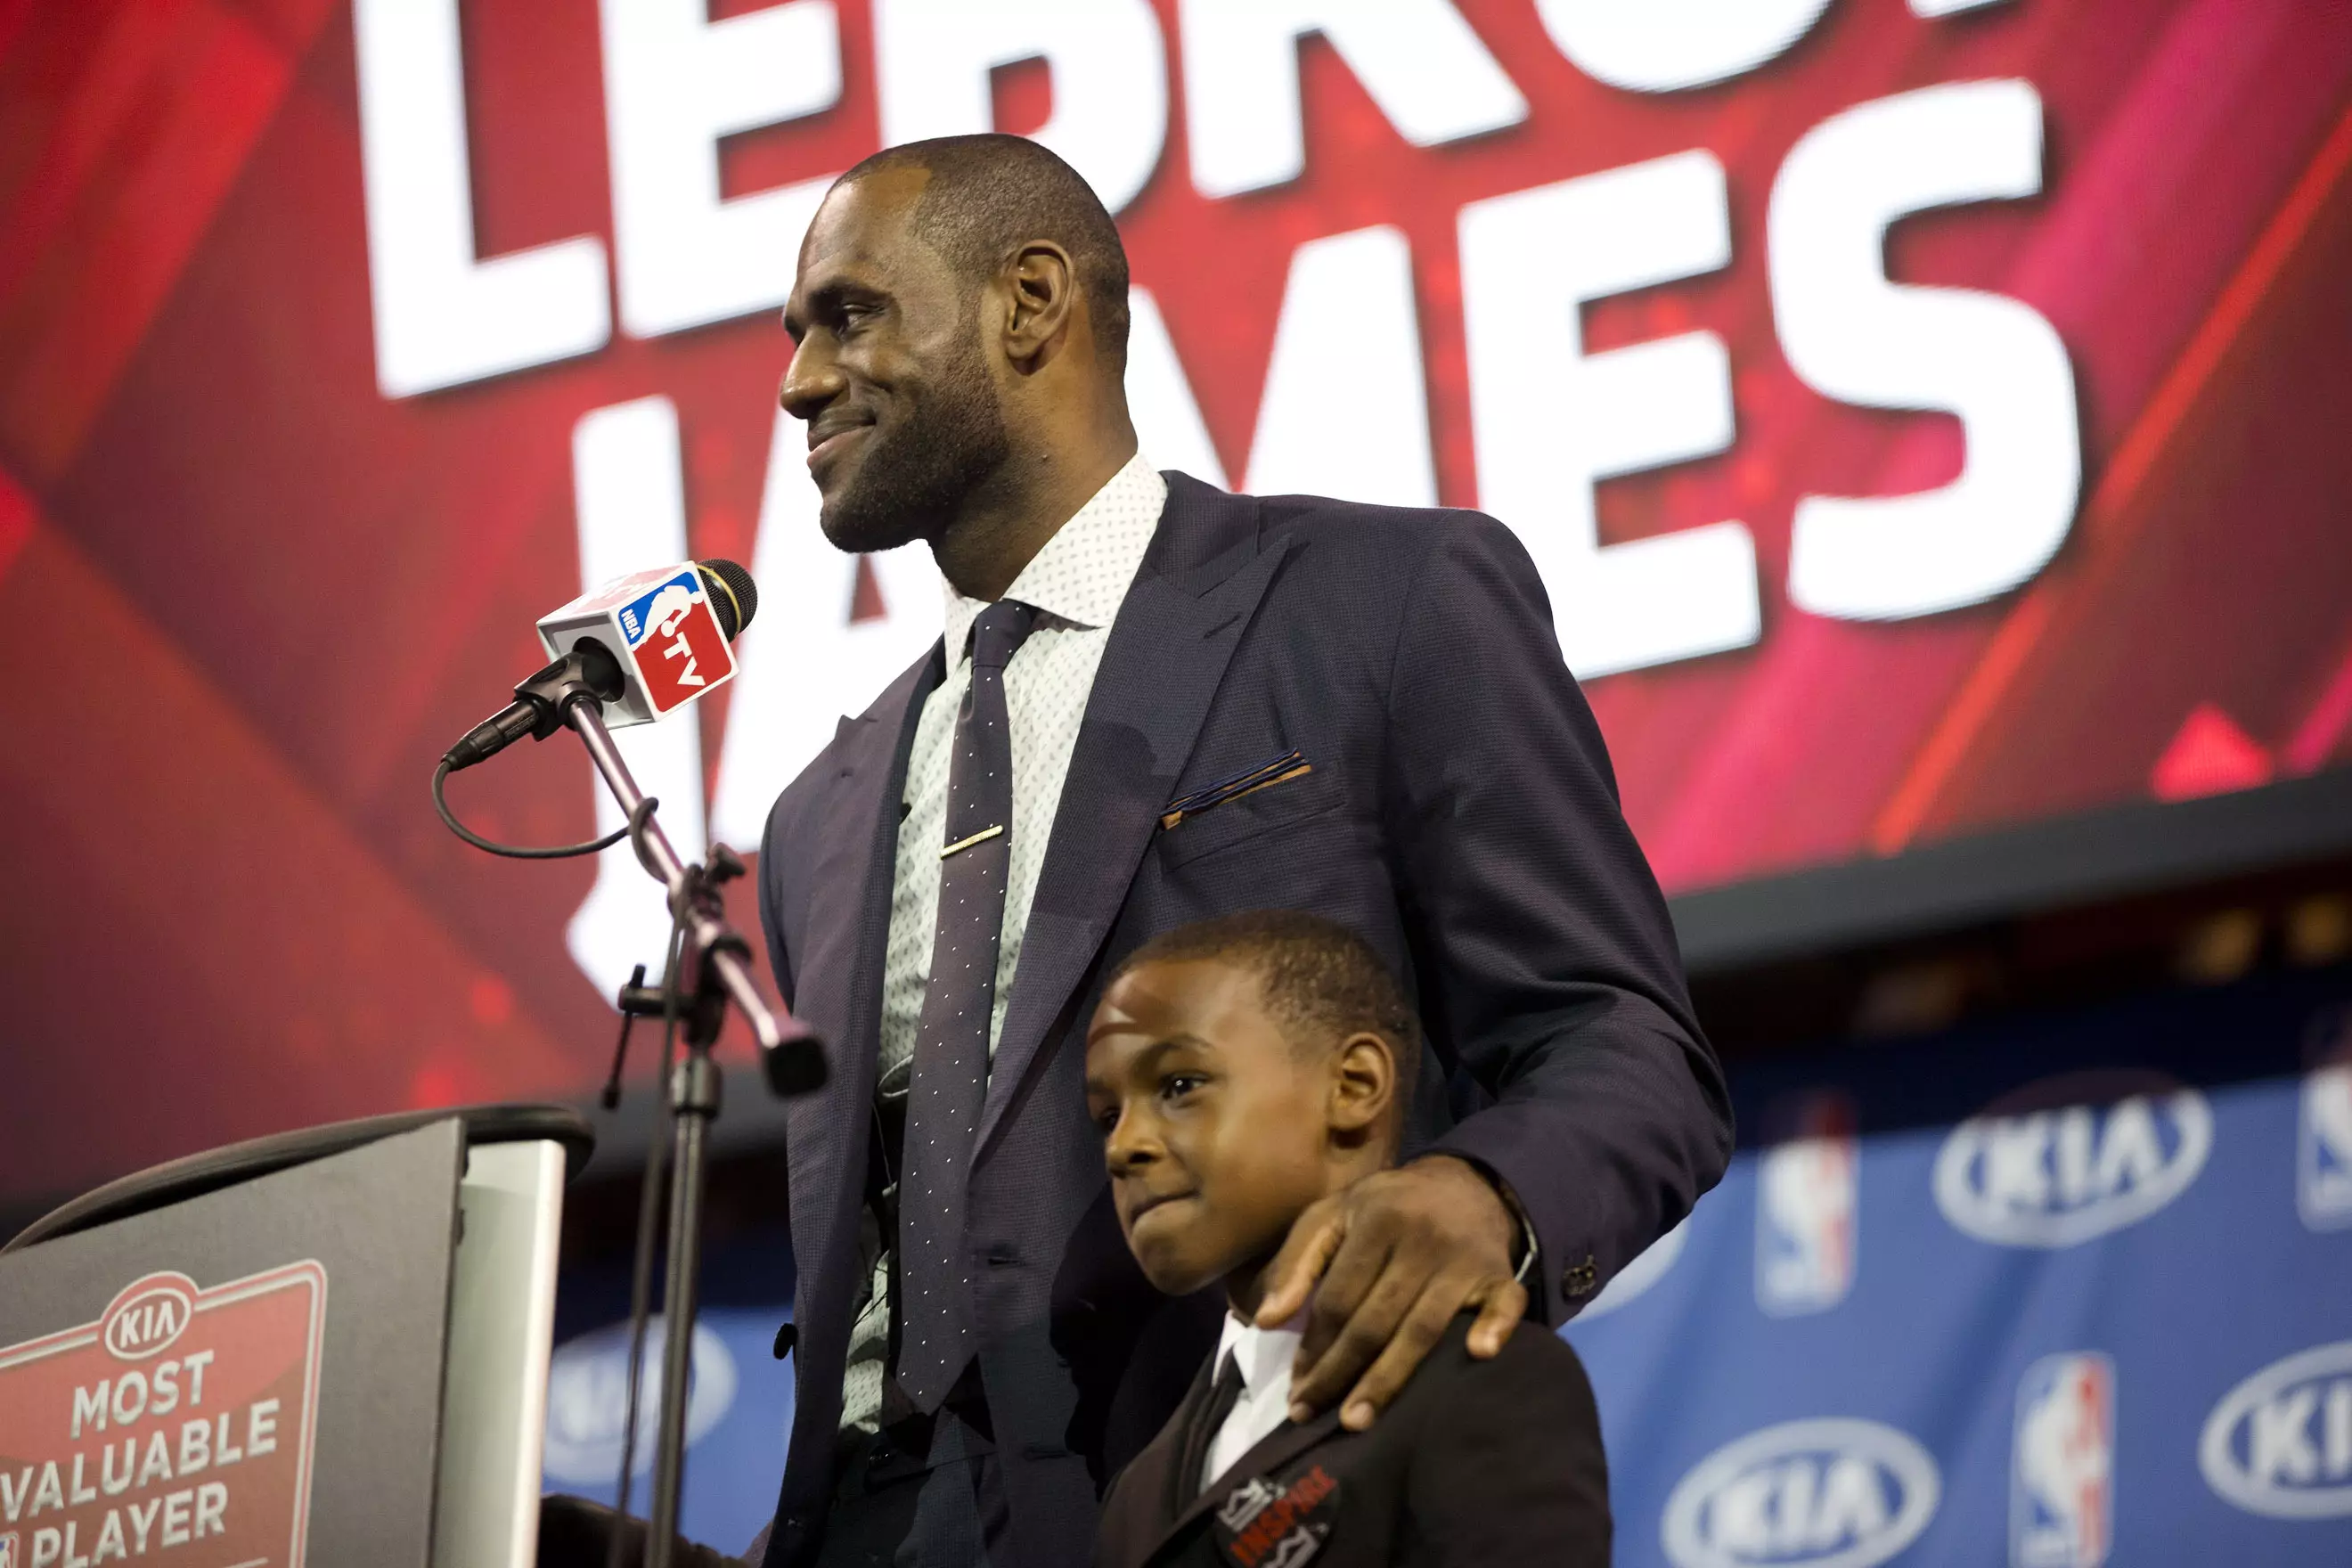 LeBron James' 11-Year-Old Son Has Already Been Offered Scholarships